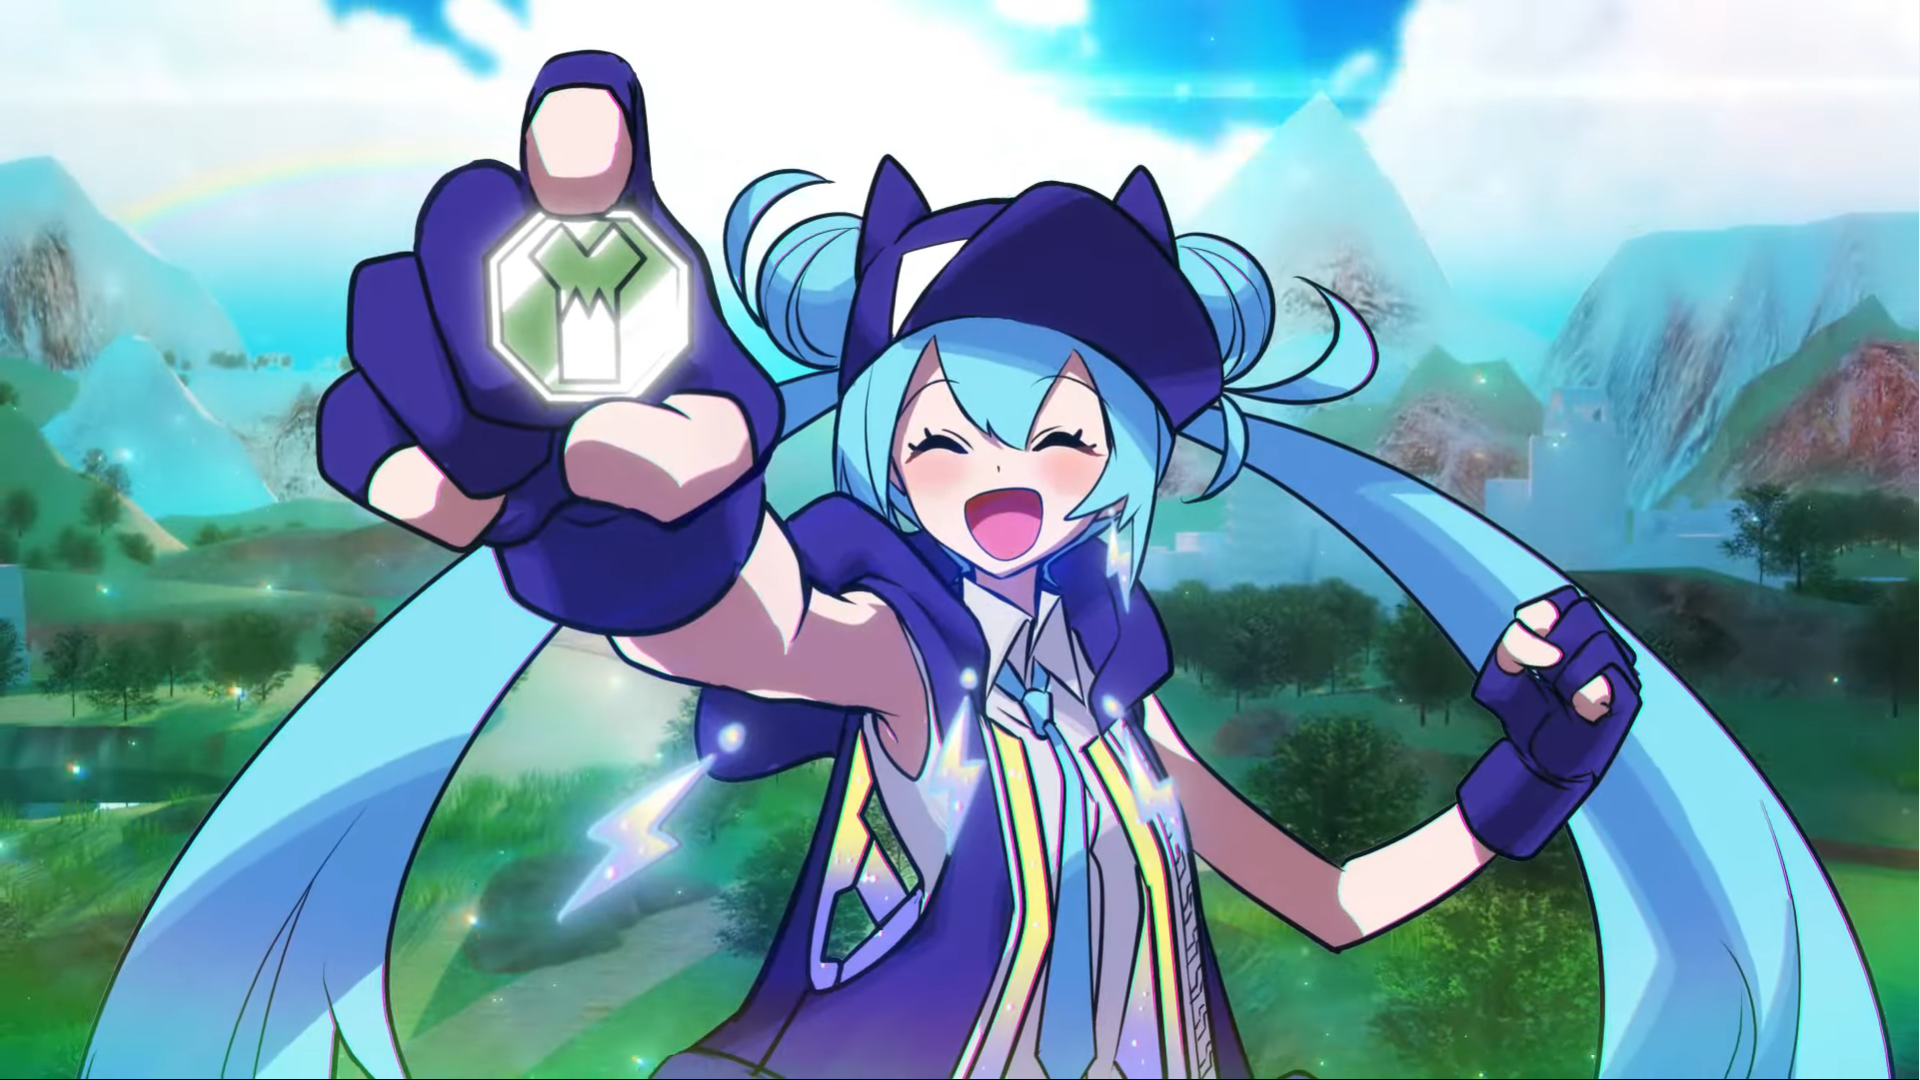 Hatsune Miku Pokémon Project Voltage Collab Launches Third Song, “I Wonder What The Future Will Be Like”